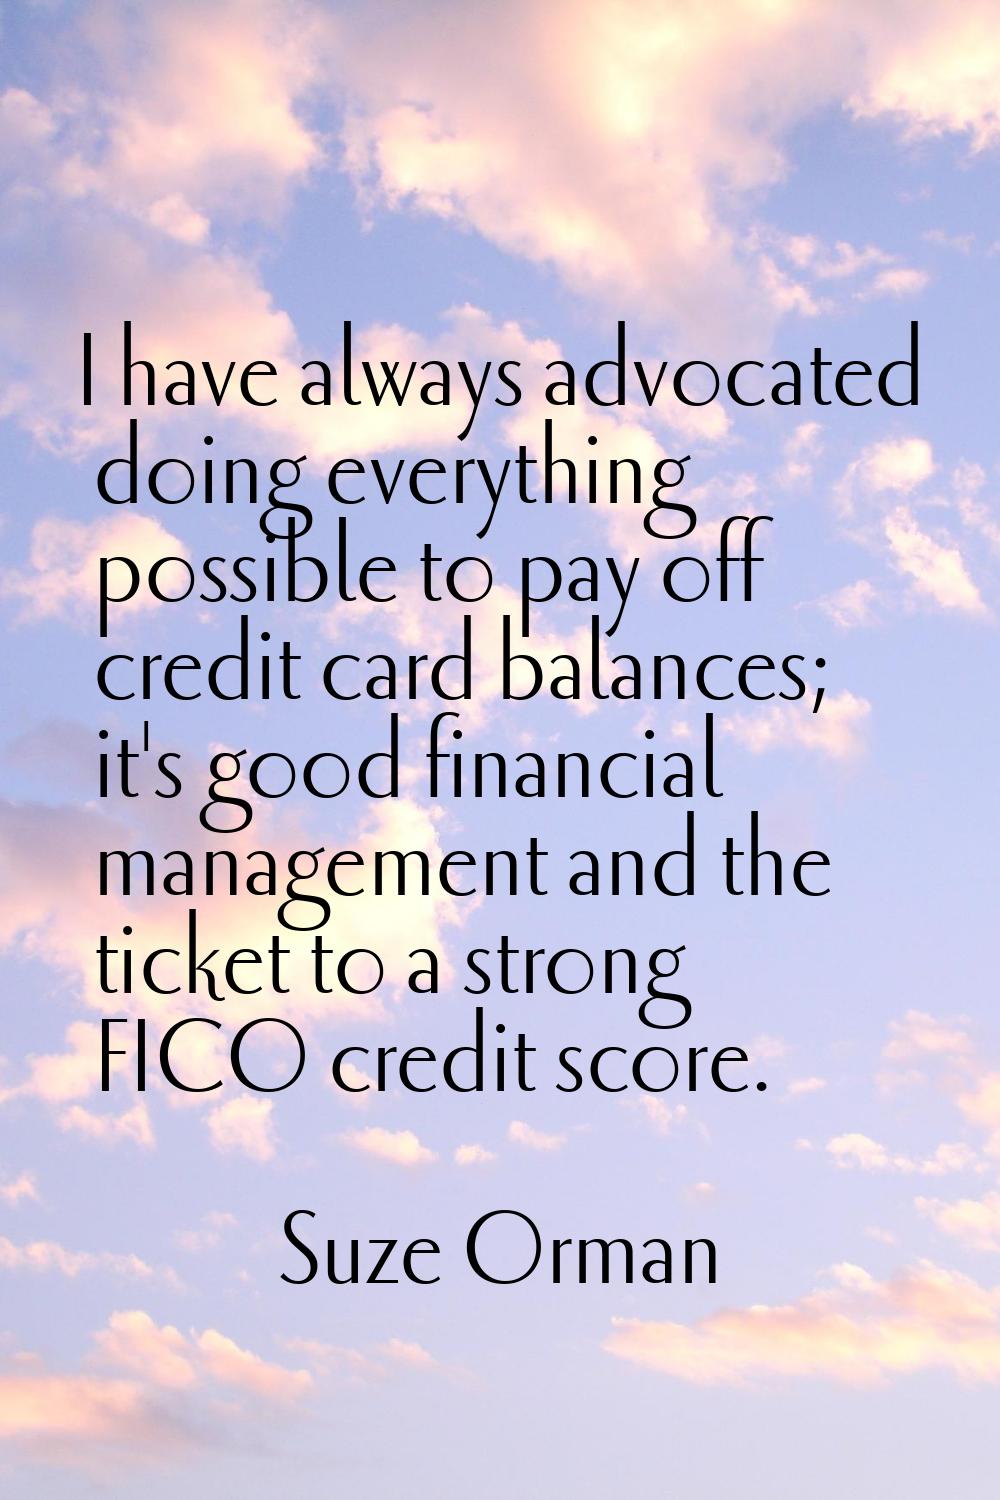 I have always advocated doing everything possible to pay off credit card balances; it's good financ